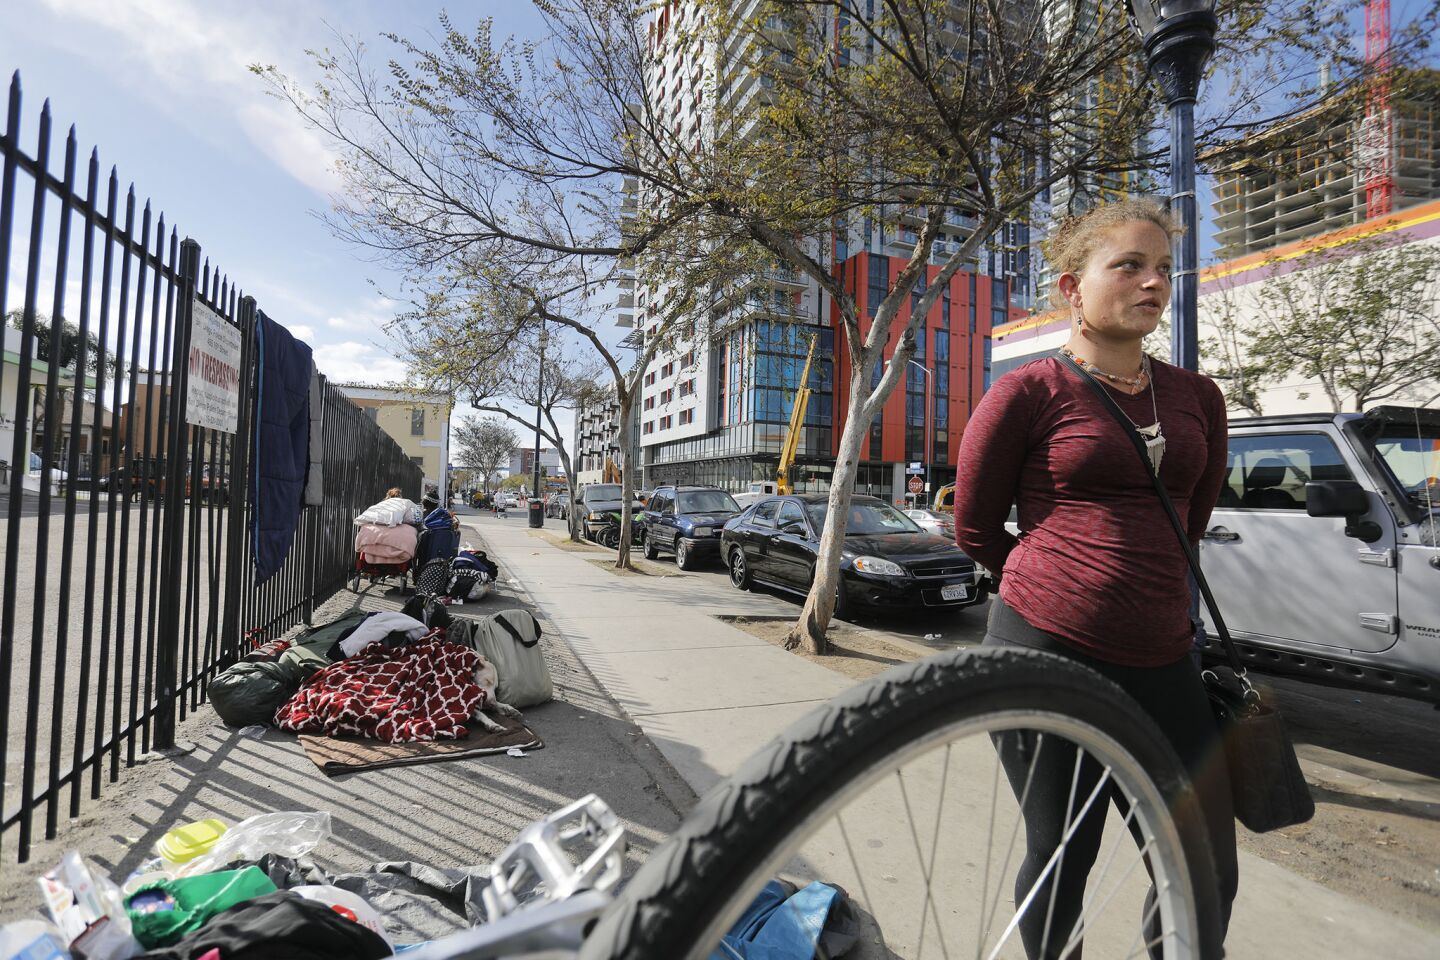 Some in East Village pushing back on homeless